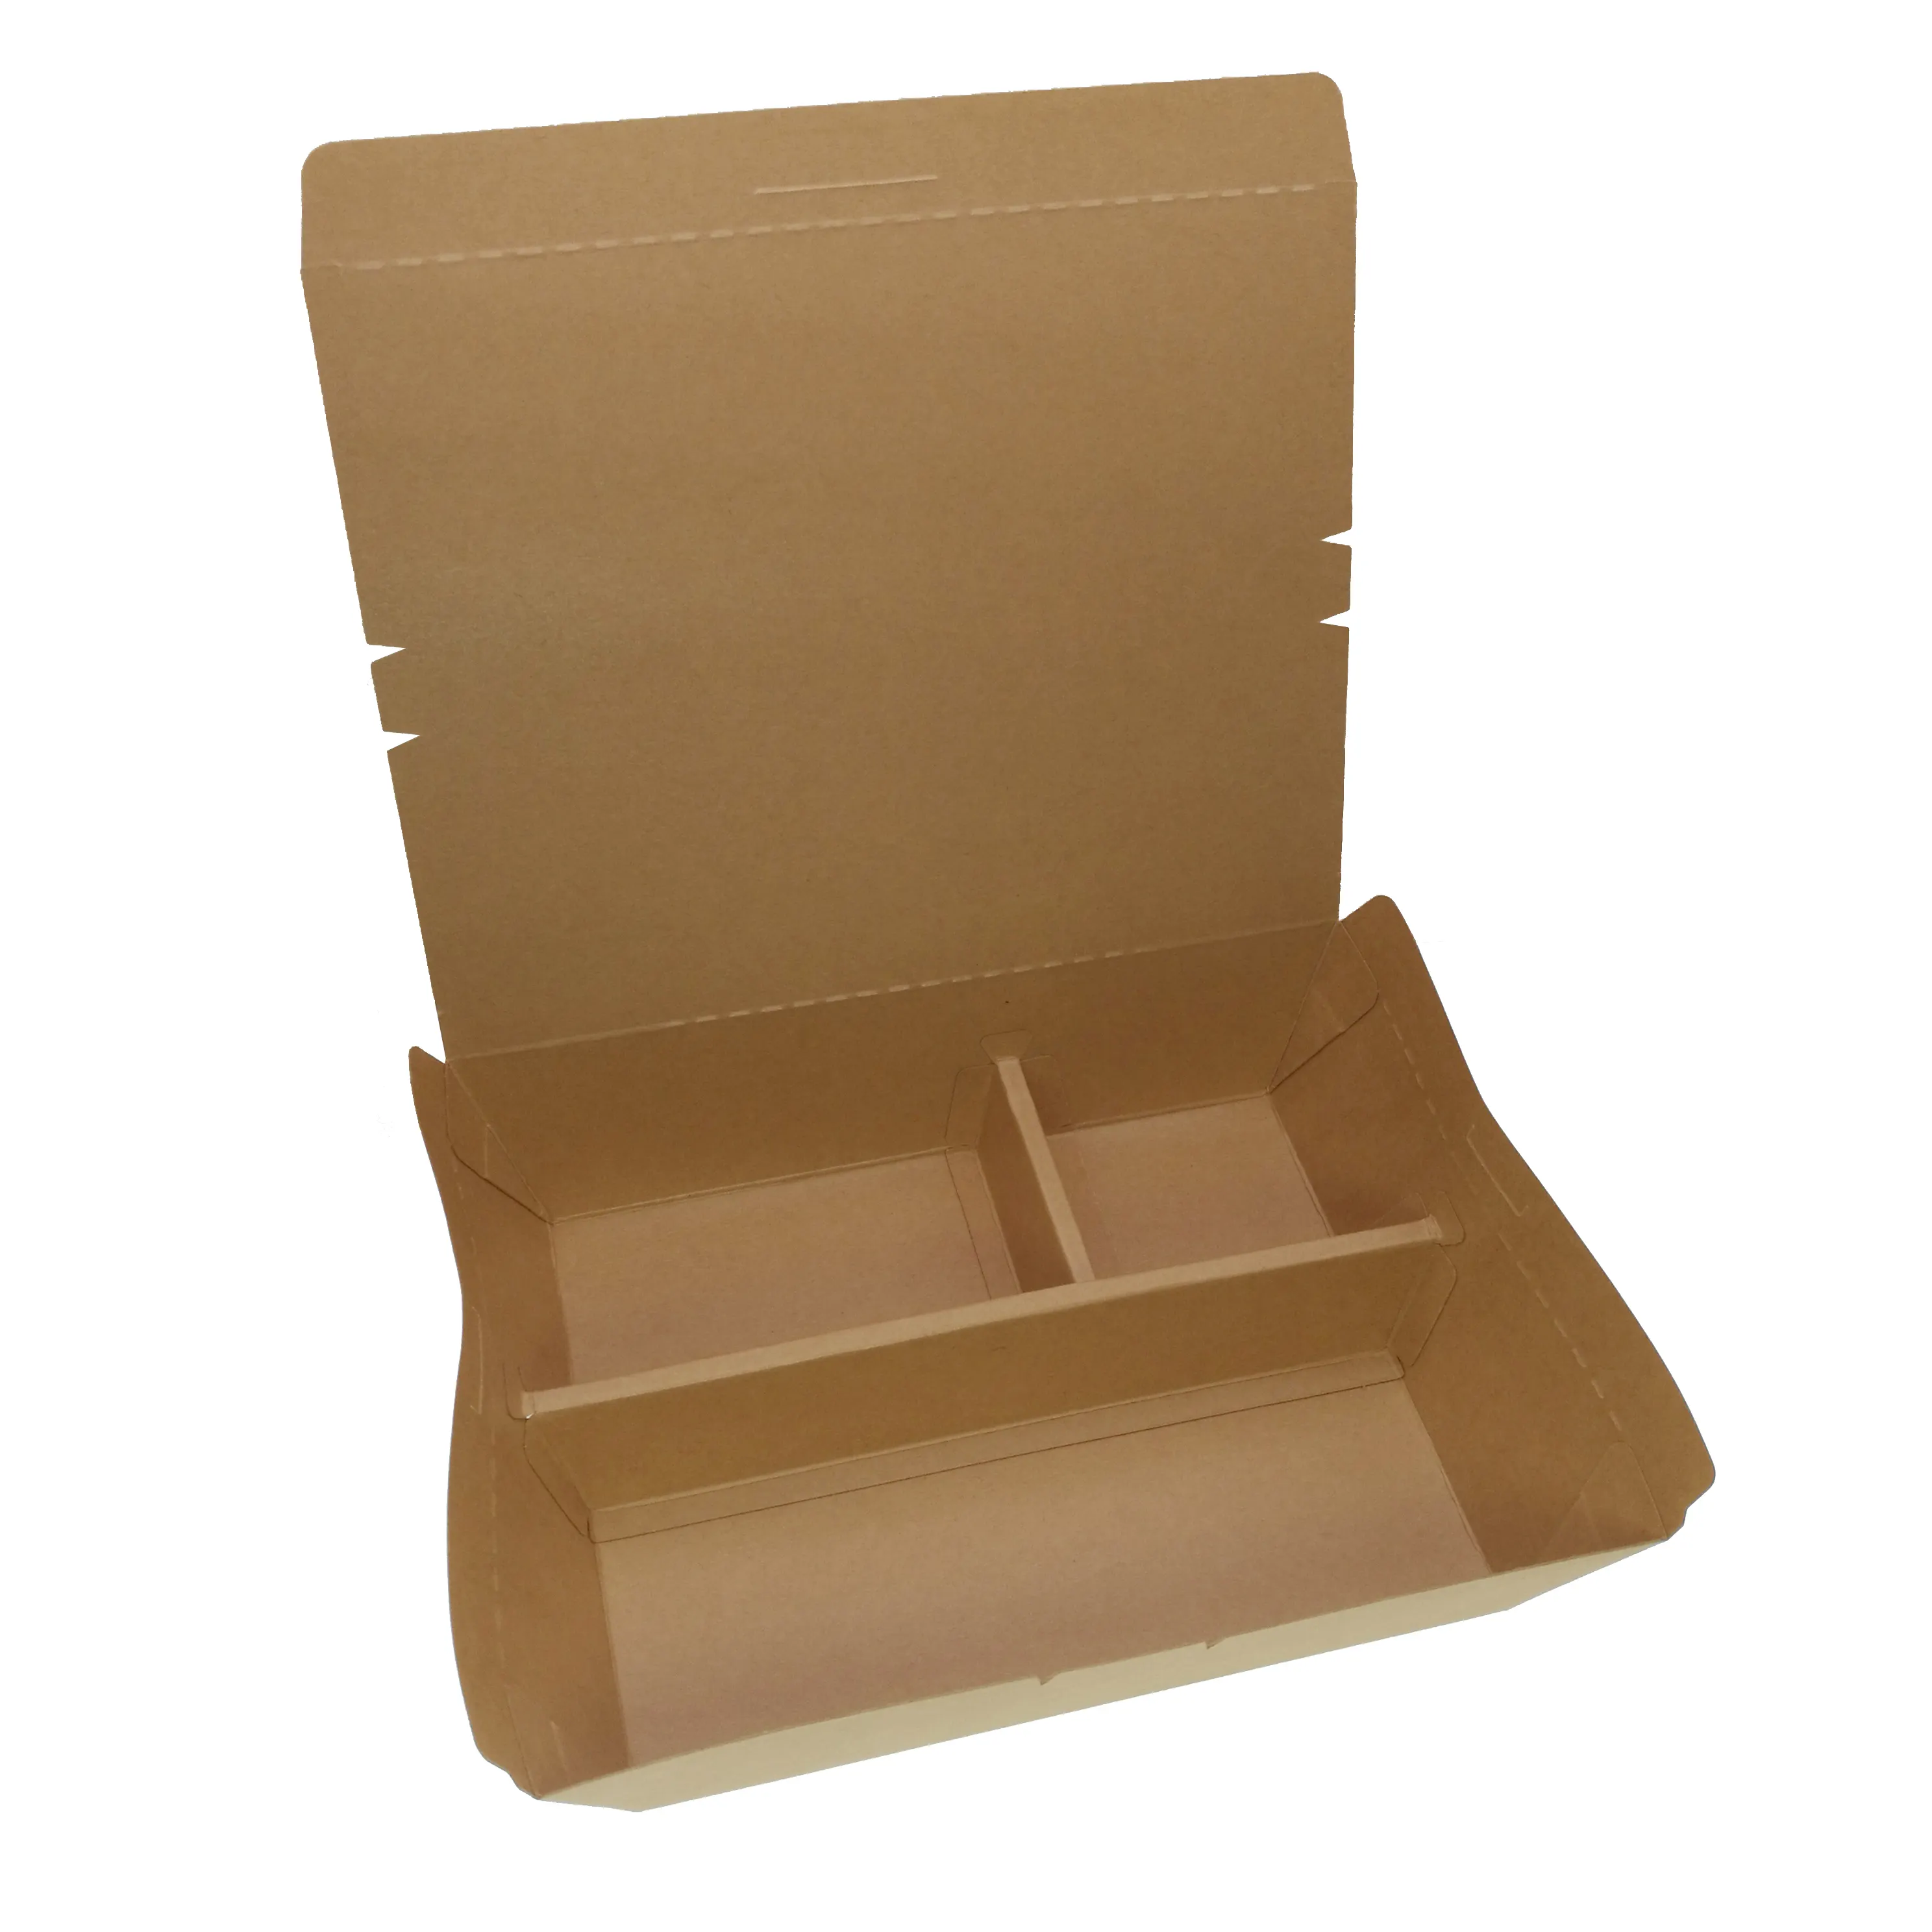 Big size 200pcs/ctn Creative design disposable lunch 3 sections cells paper cardboard eco friendly fast food packaging box